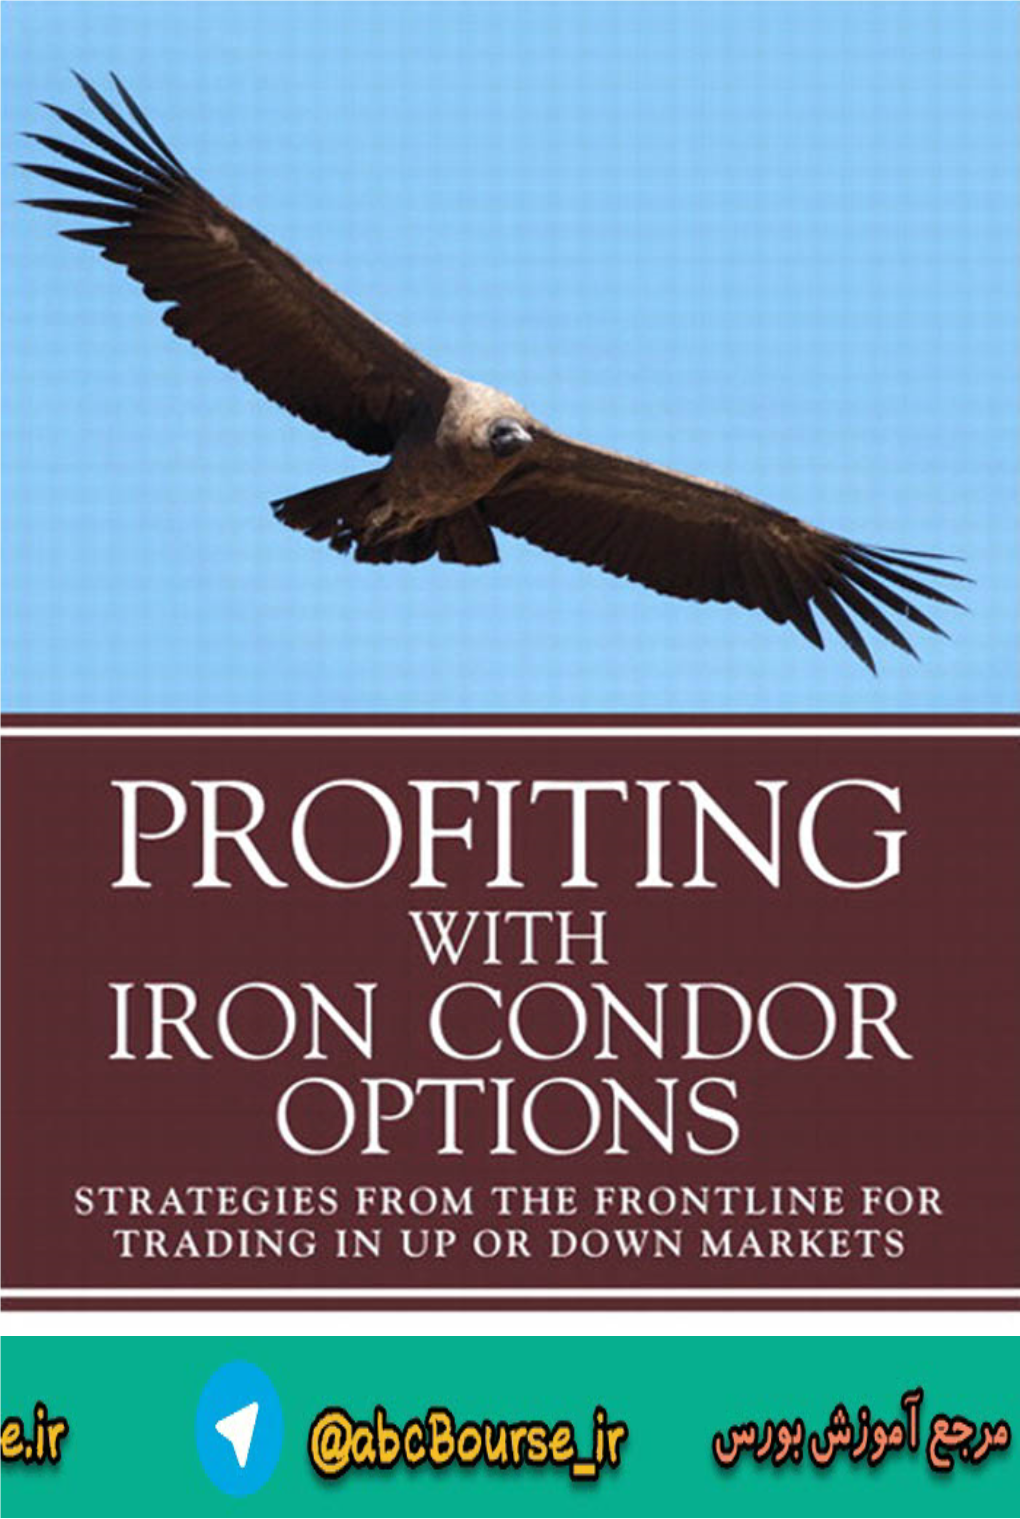 Profiting with Iron Condor Option : Strategies from the Frontline For